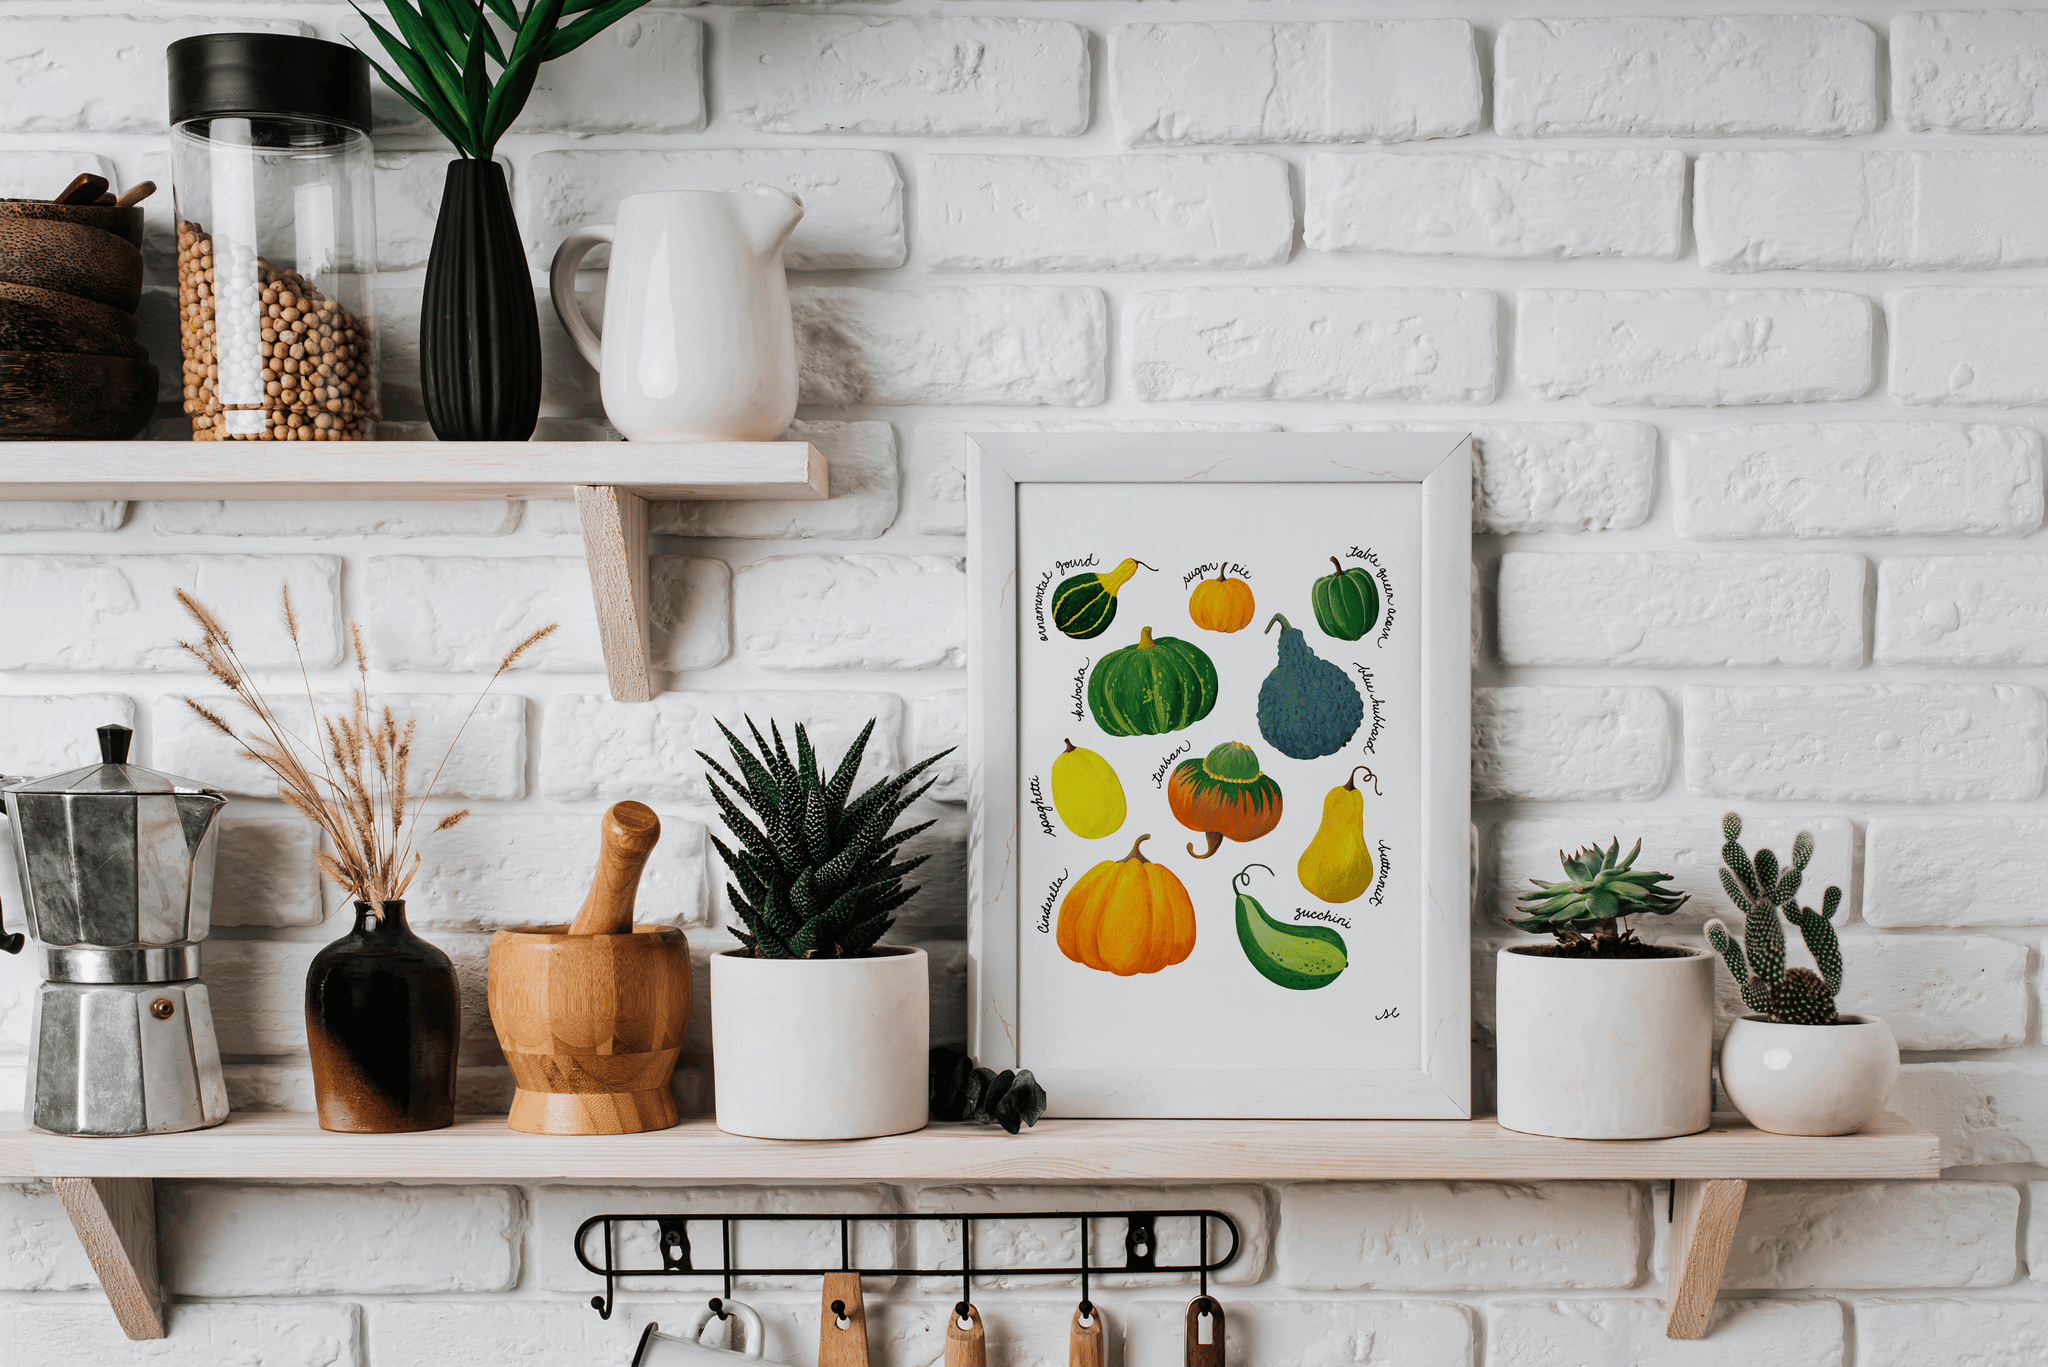 Know Your Gourds Print